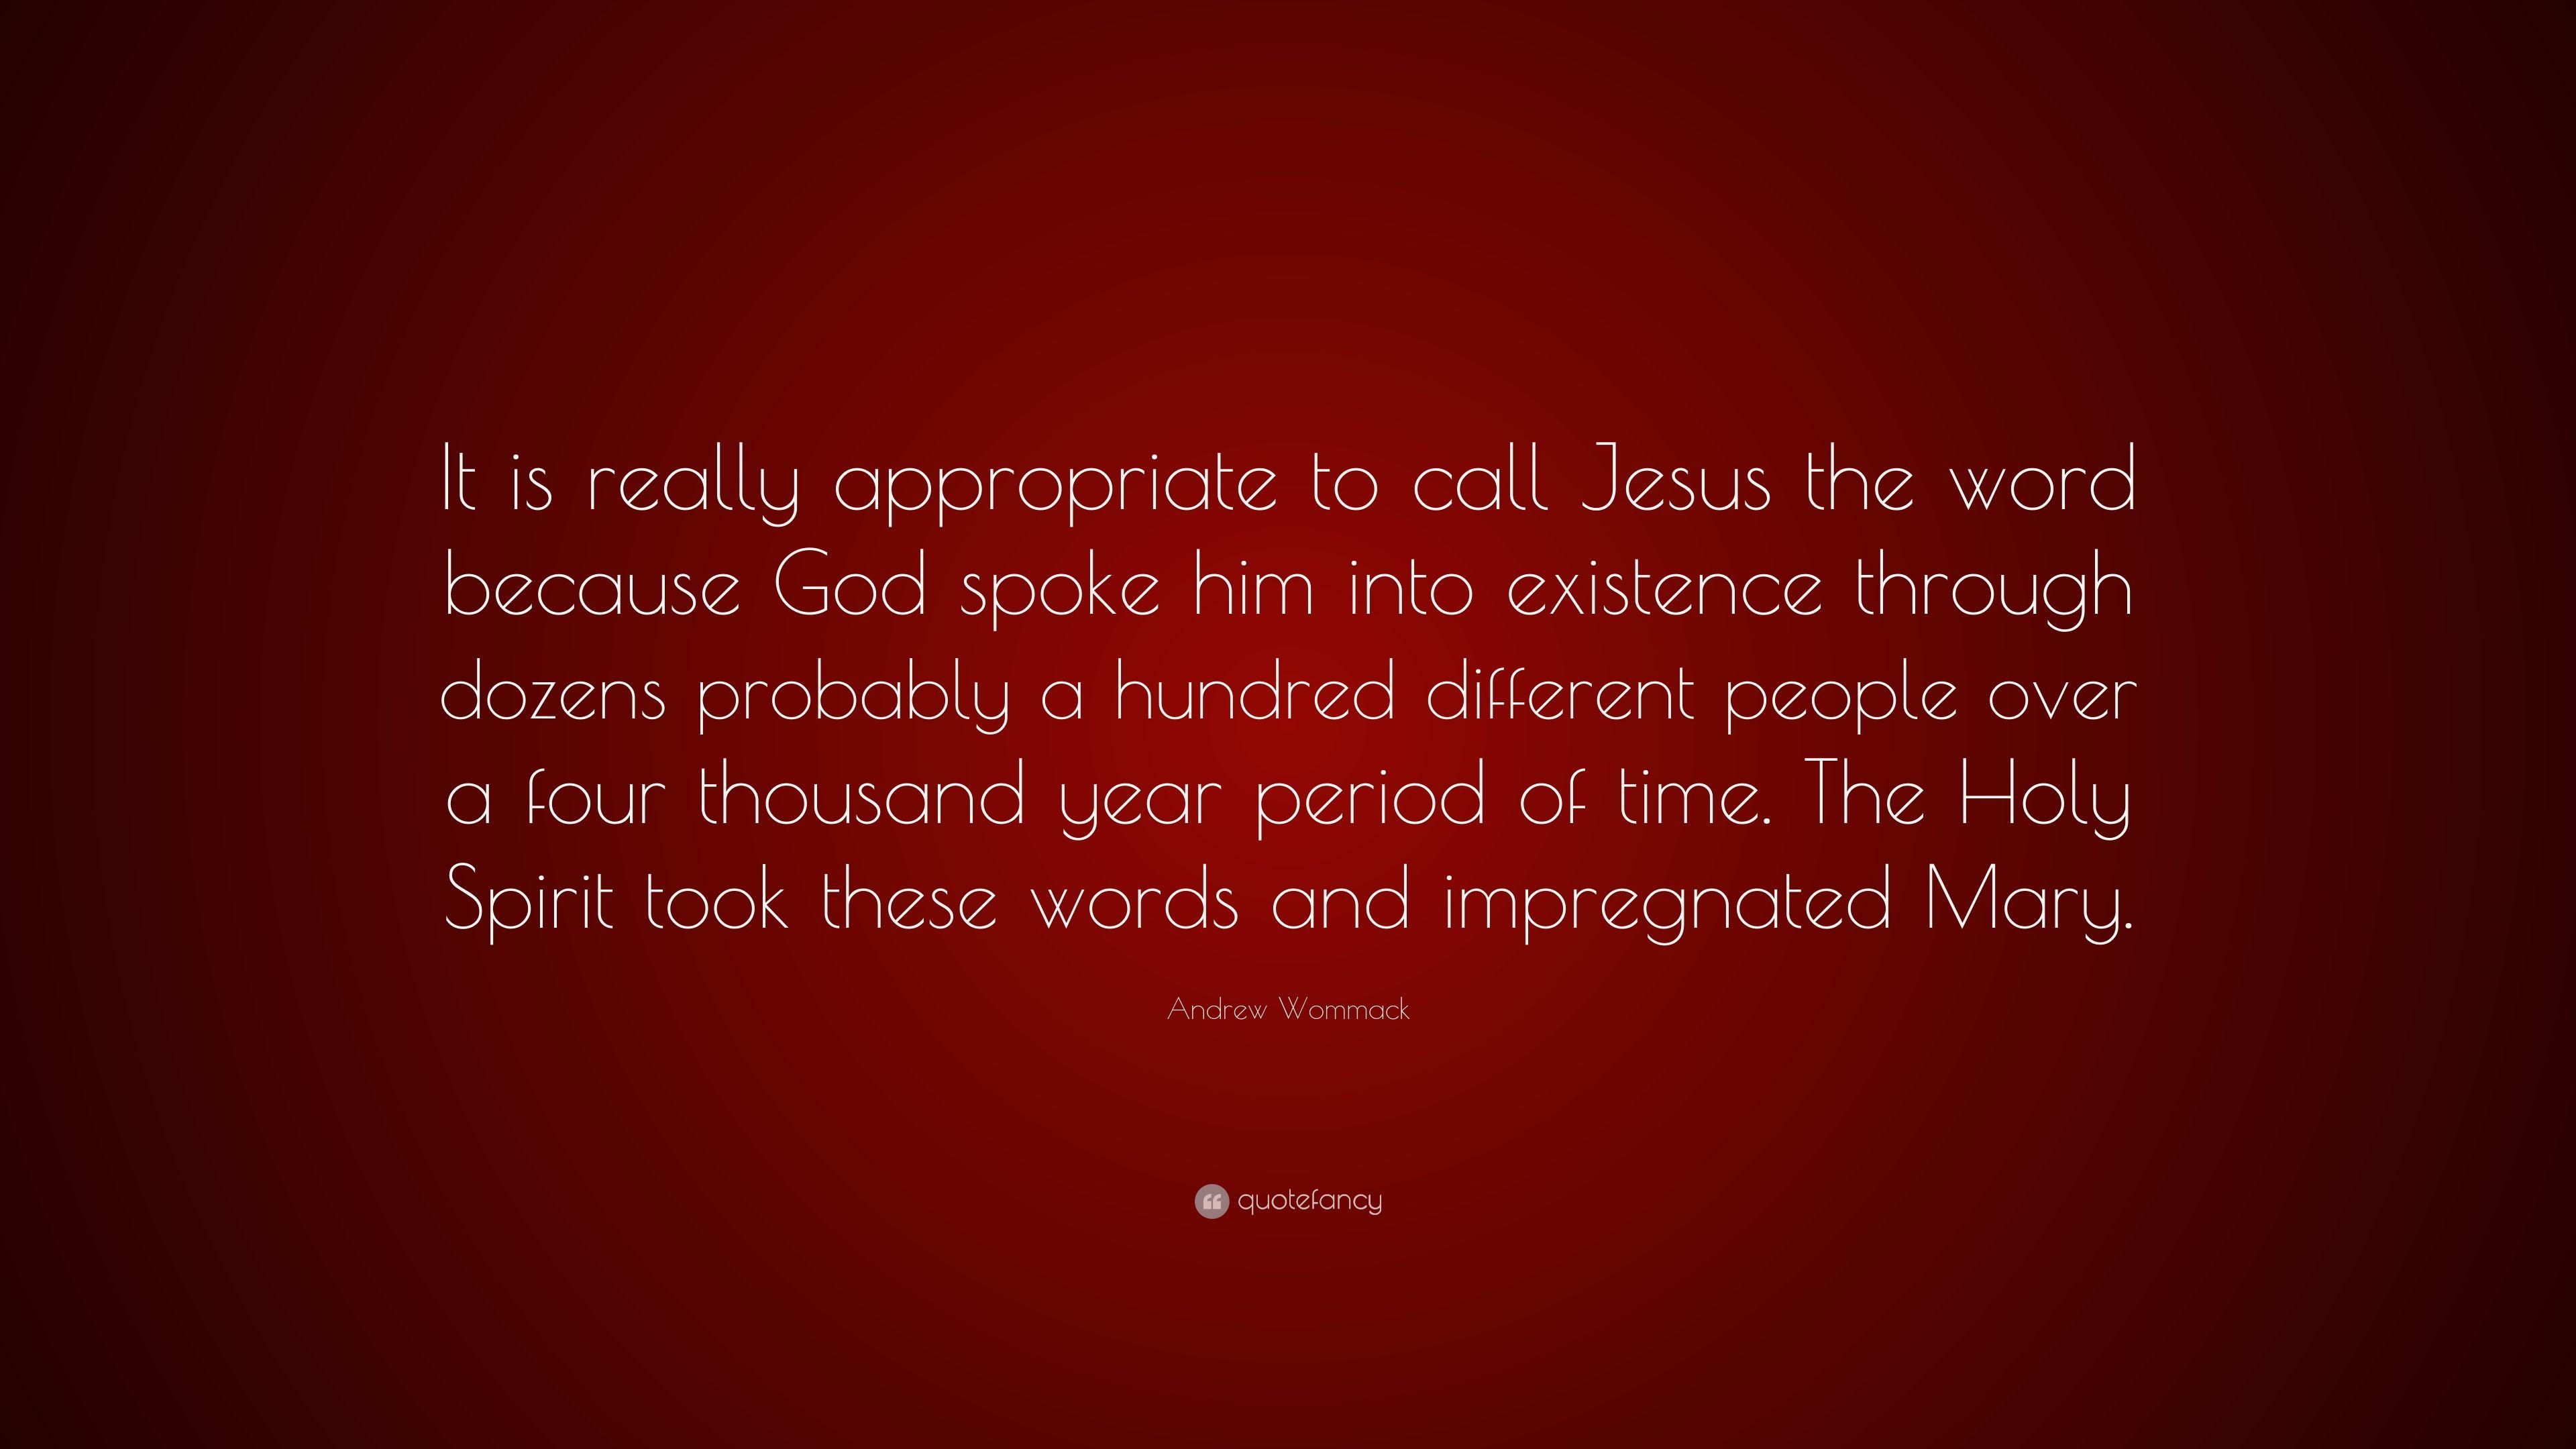 Andrew Wommack Quote: “It is really appropriate to call Jesus